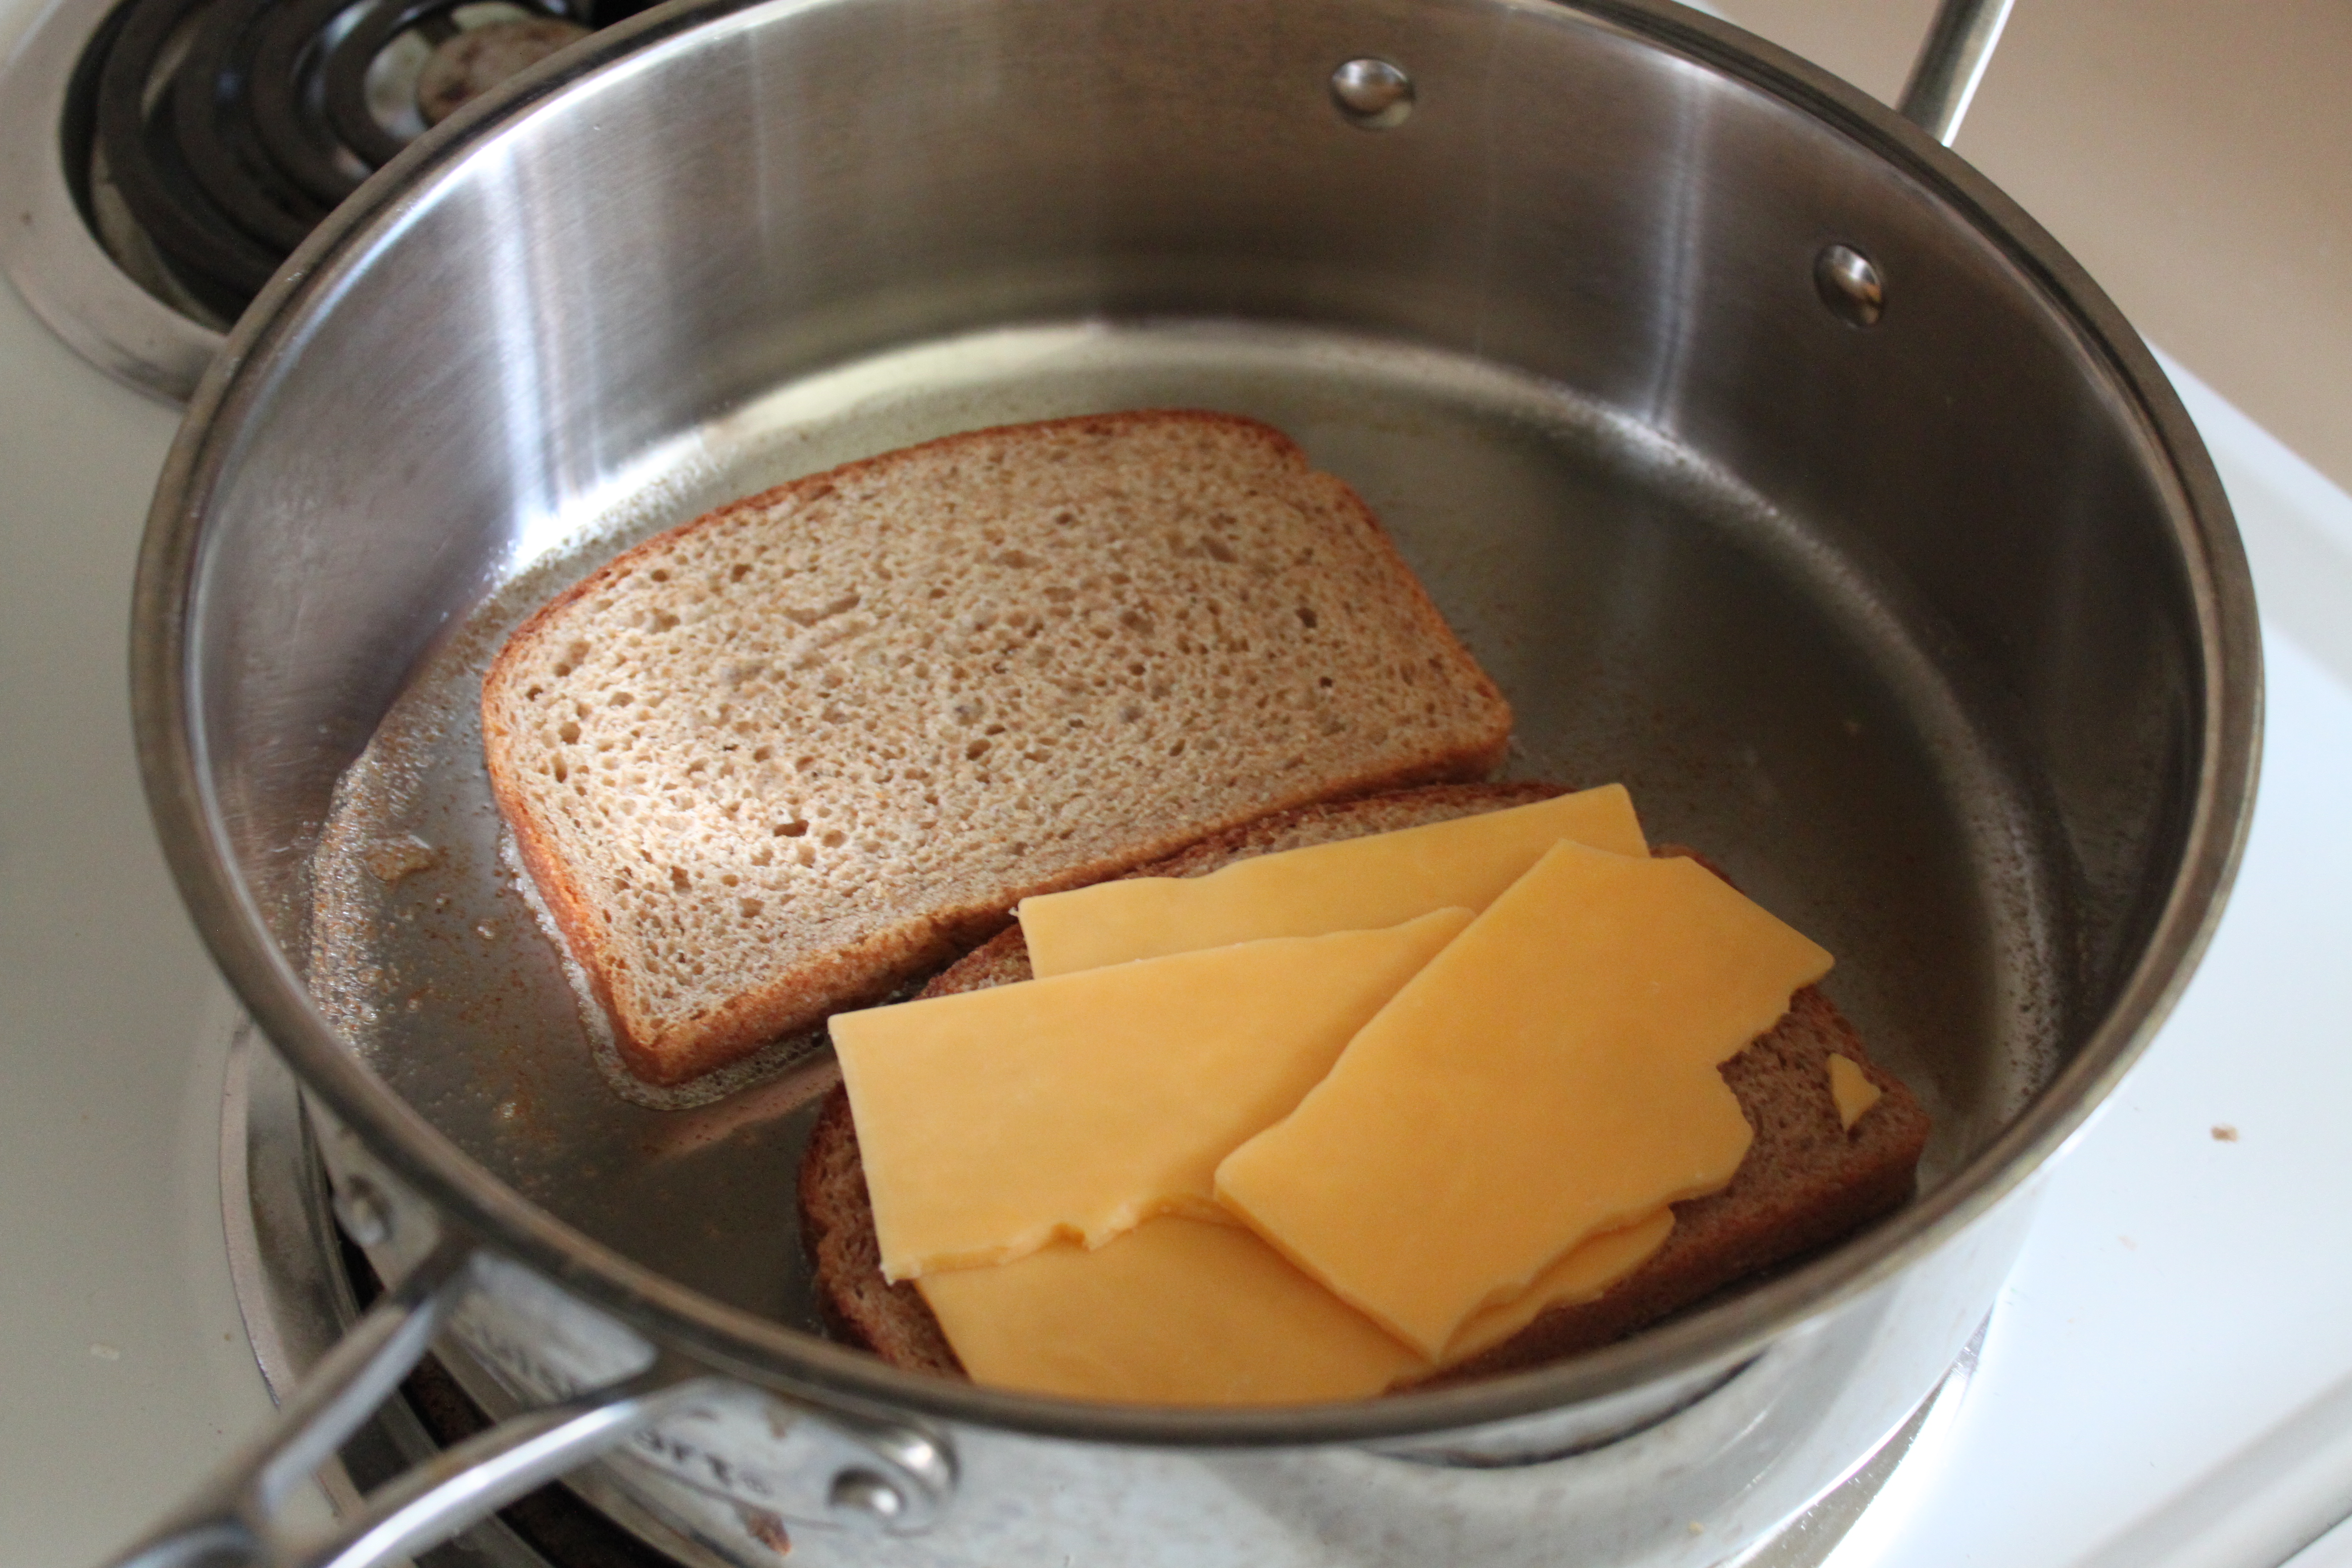 Add cheese to bread